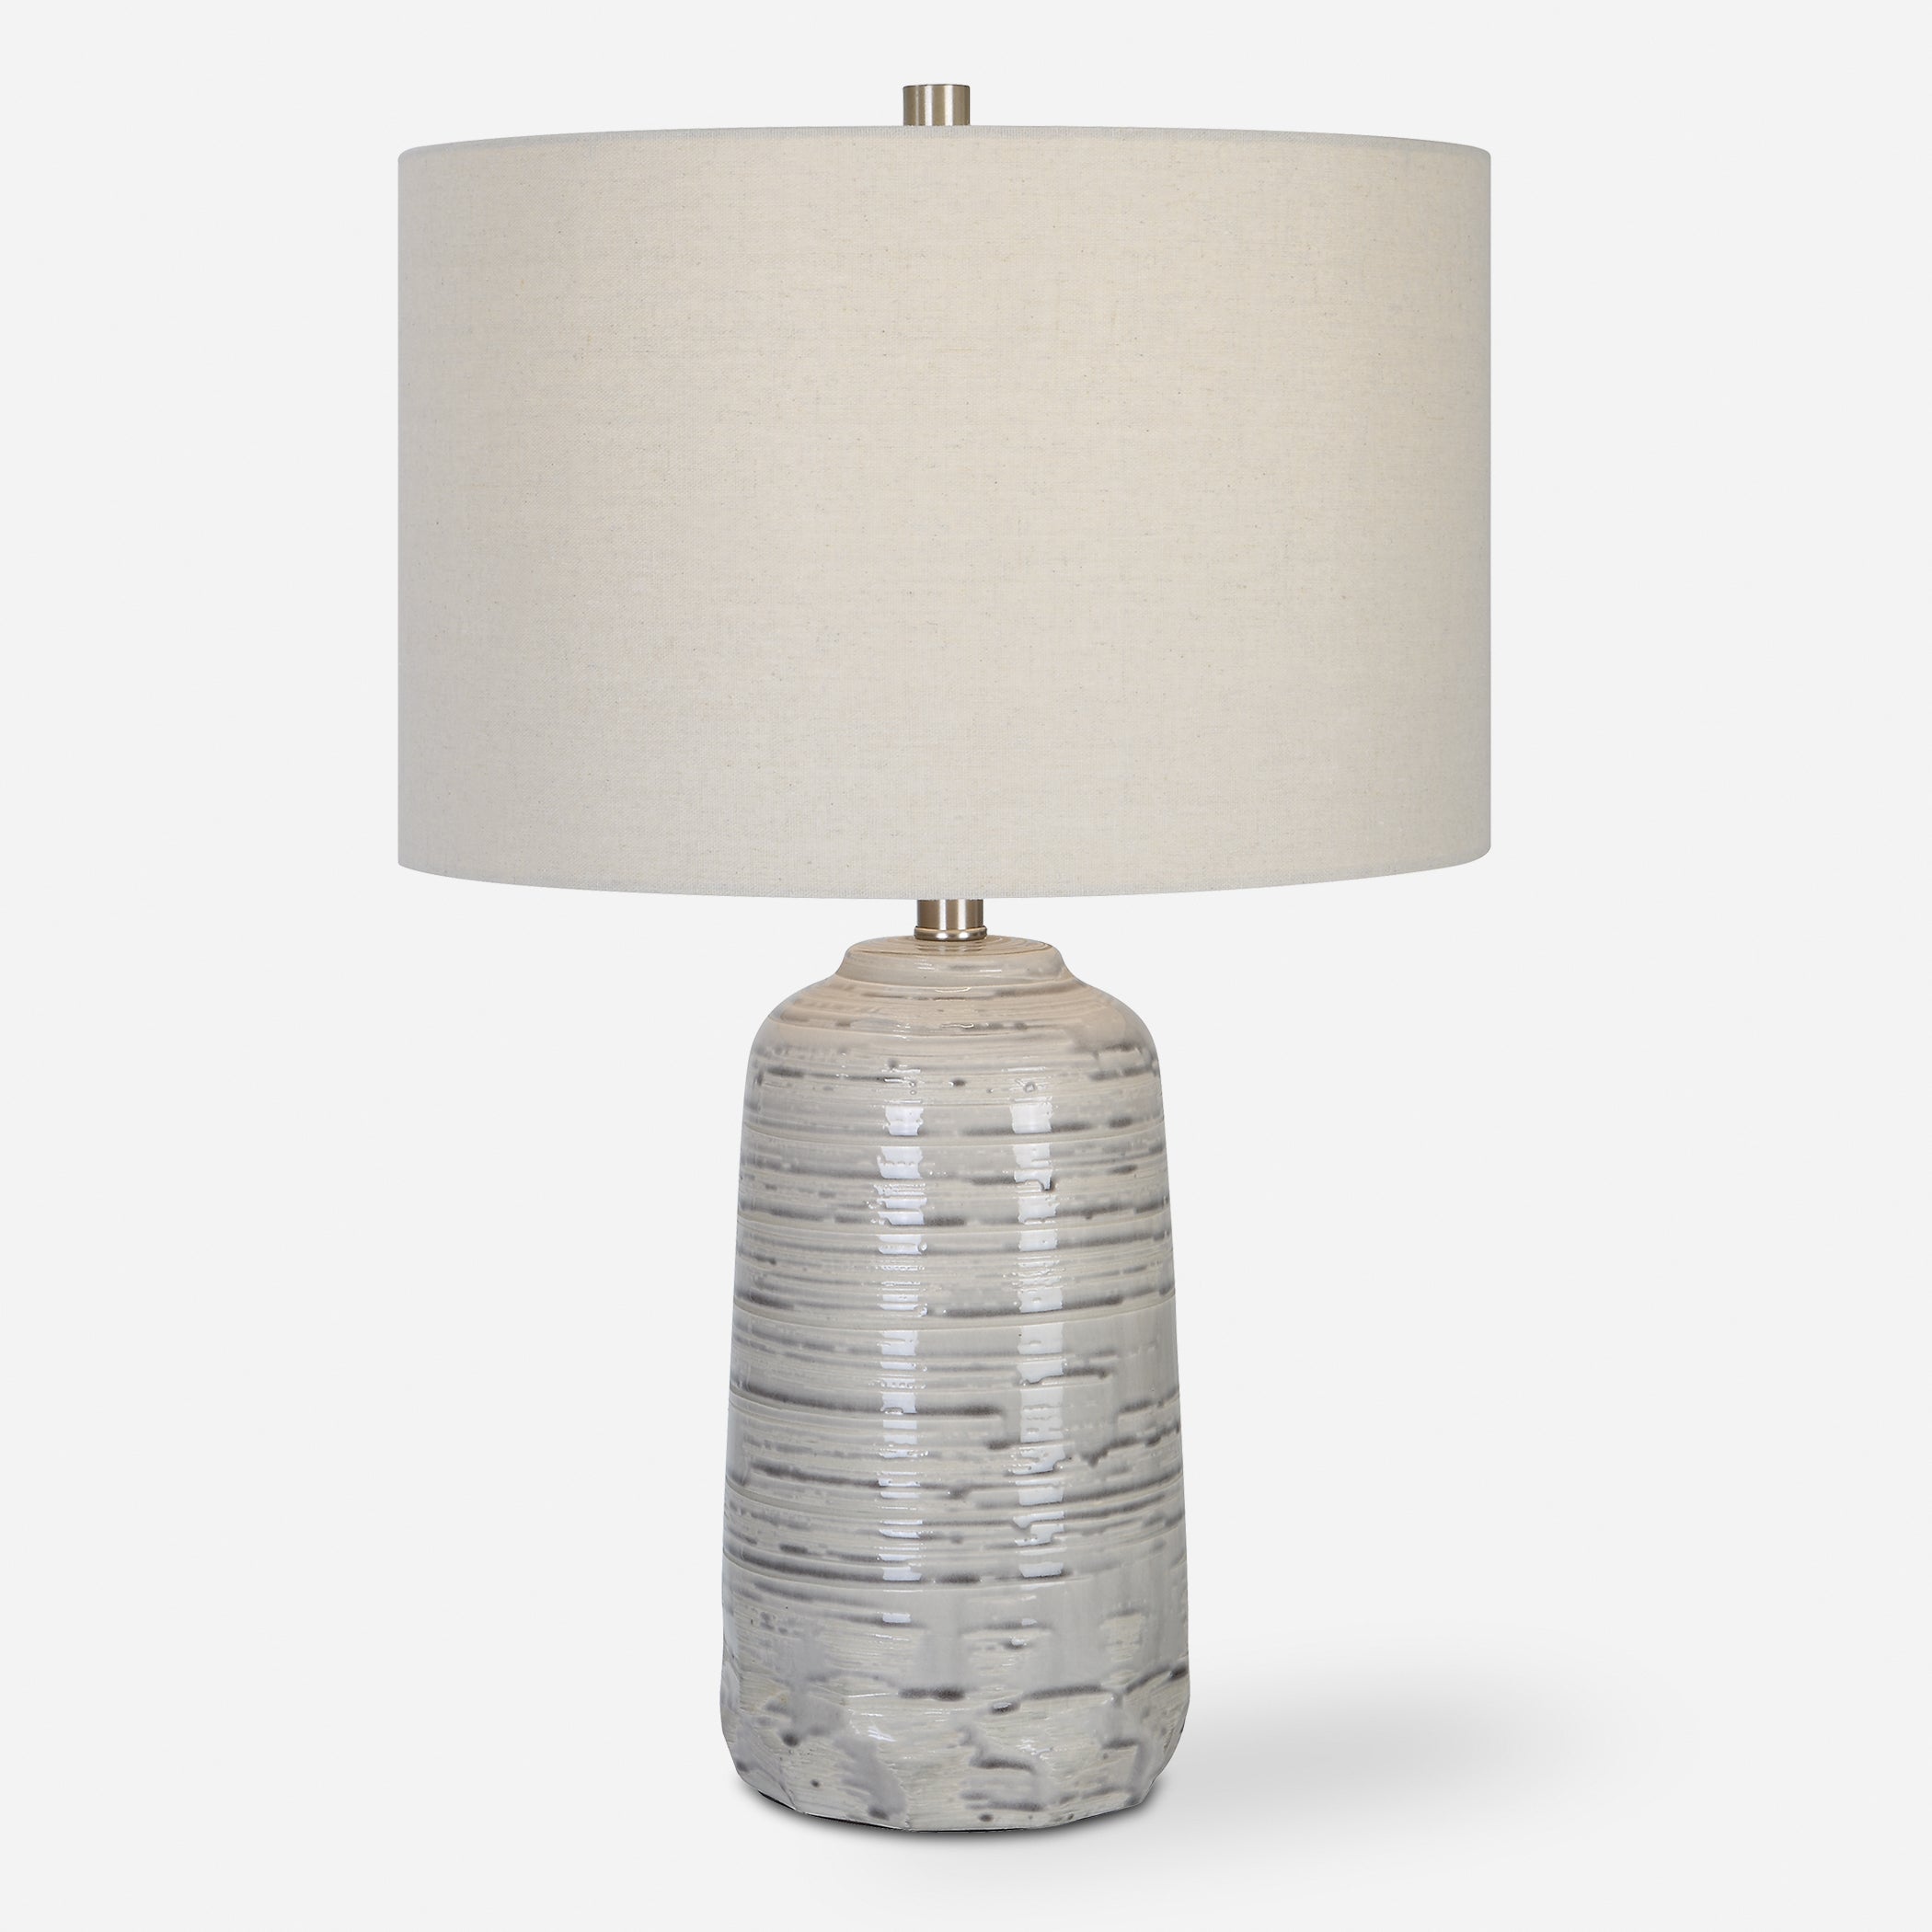 Uttermost Cyclone Ivory Table Lamp Ivory Table Lamp Uttermost   